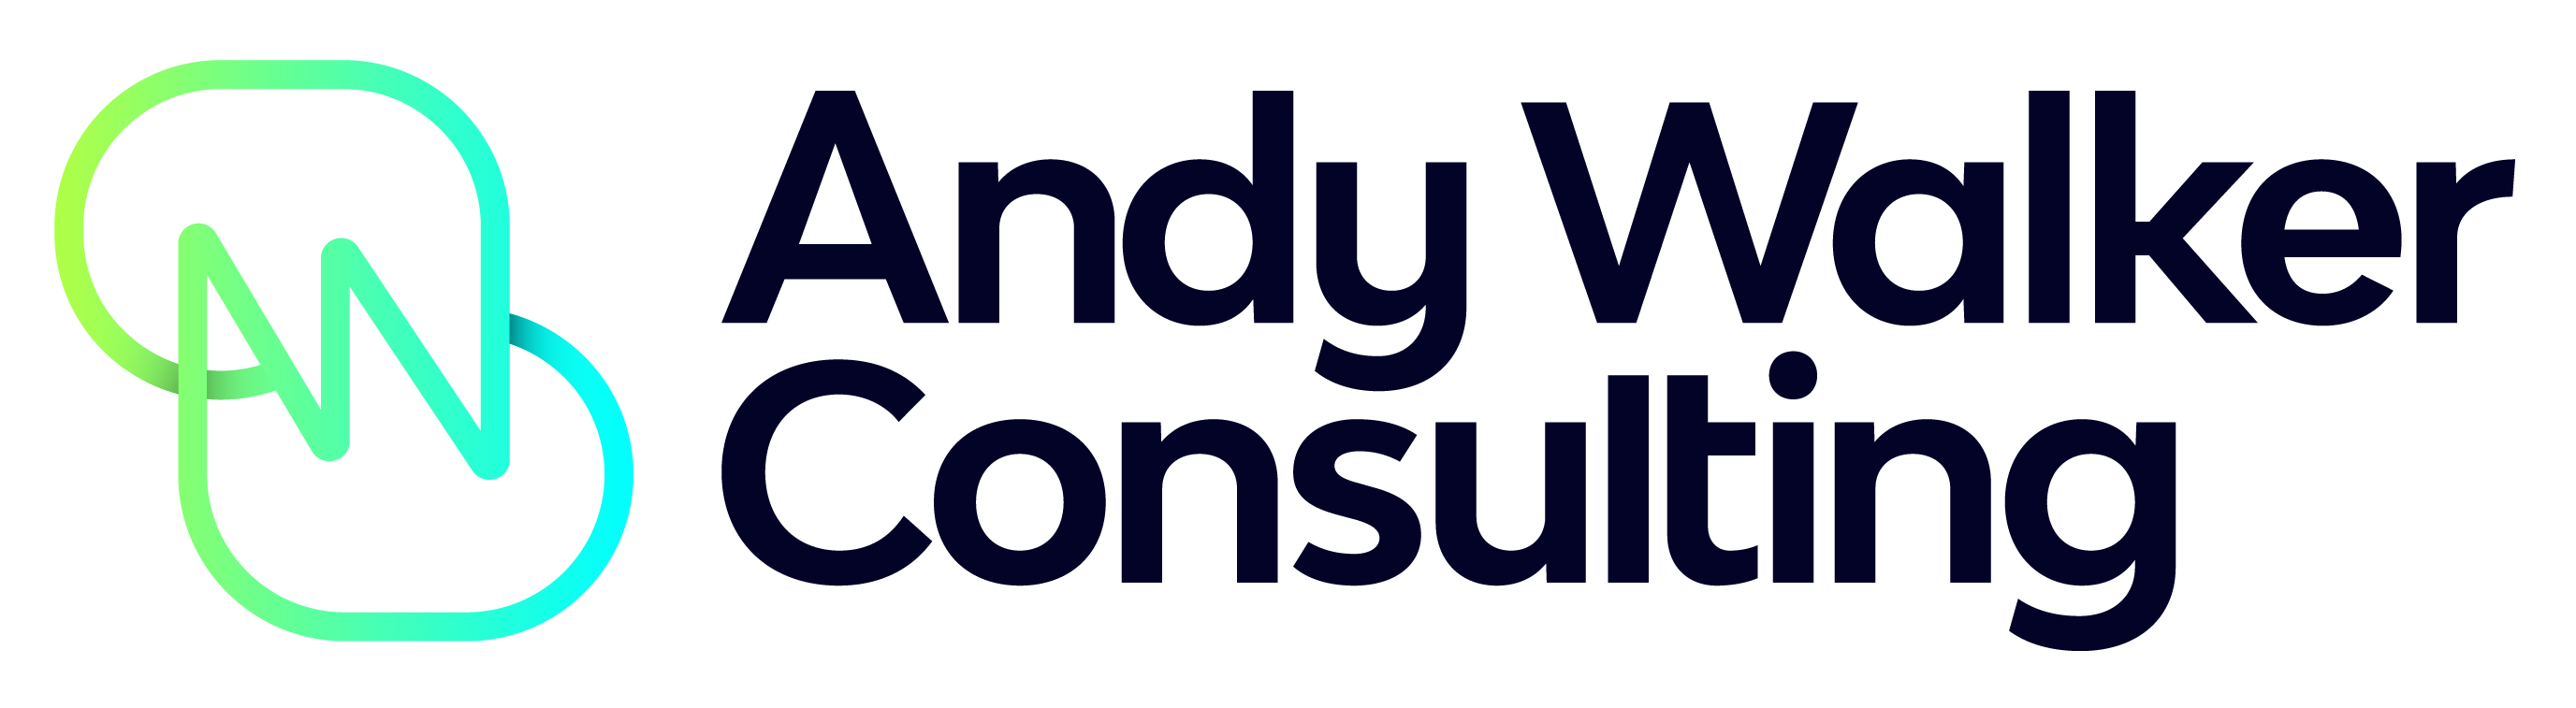 Andy Walker Consulting-09